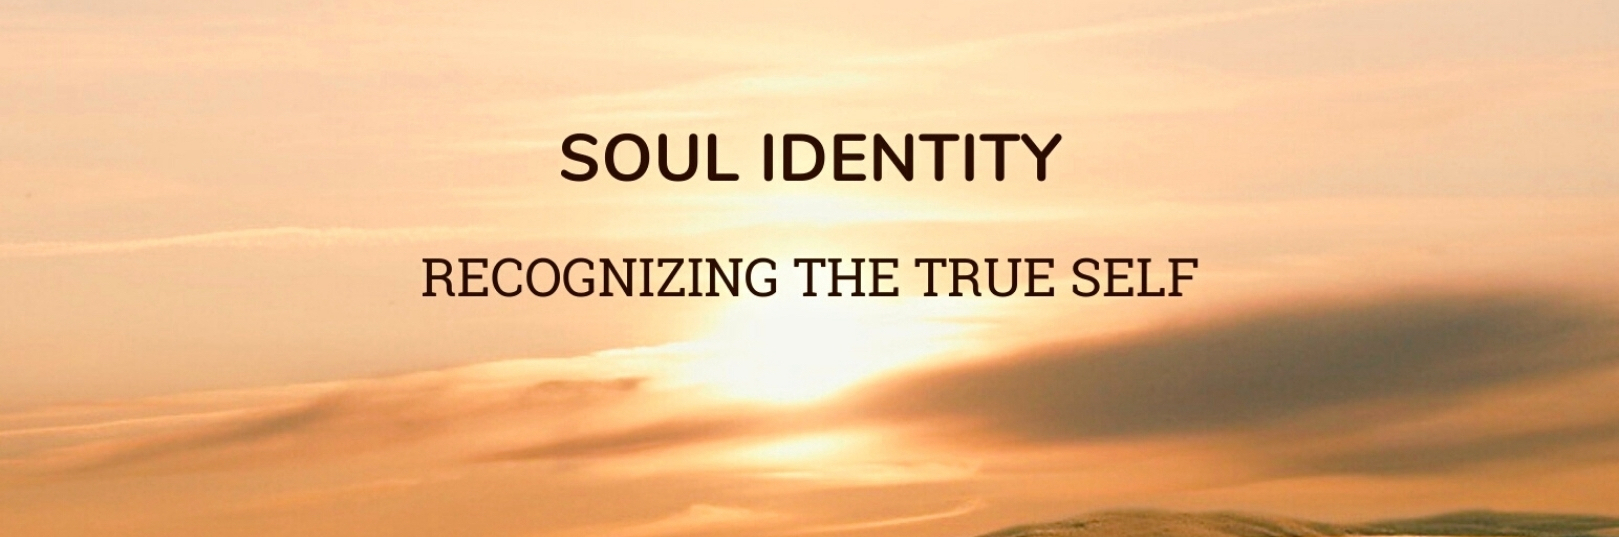 Soul Identity: Intro Goes Here